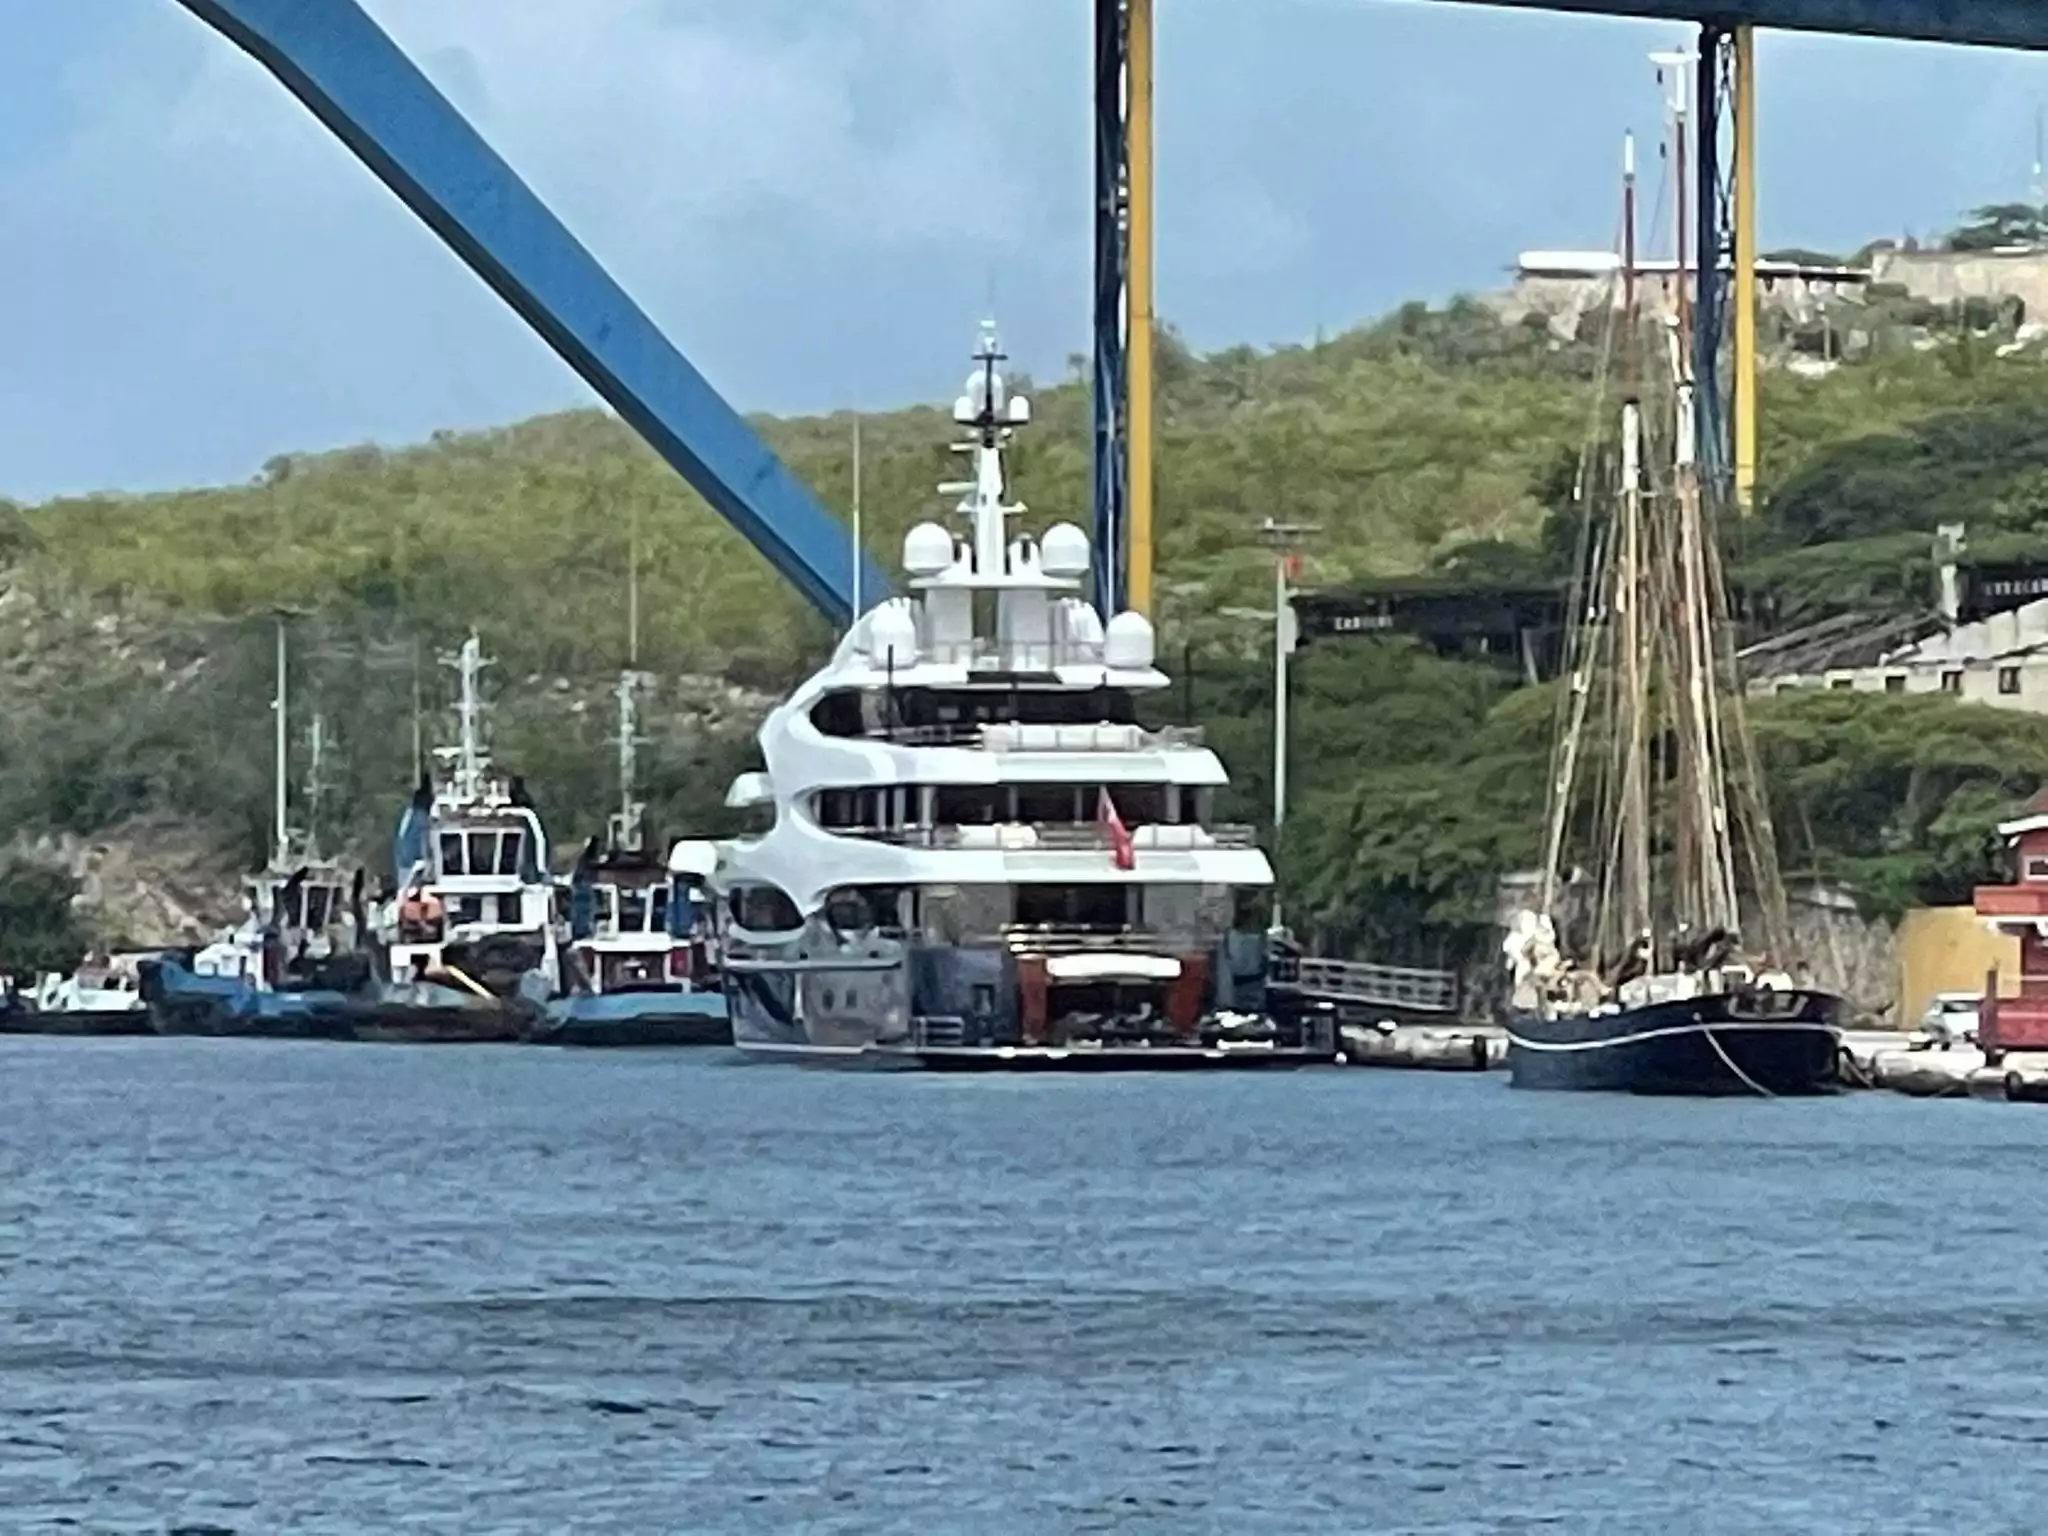 The Oceanco yacht Barbara in Willemstad Curacao